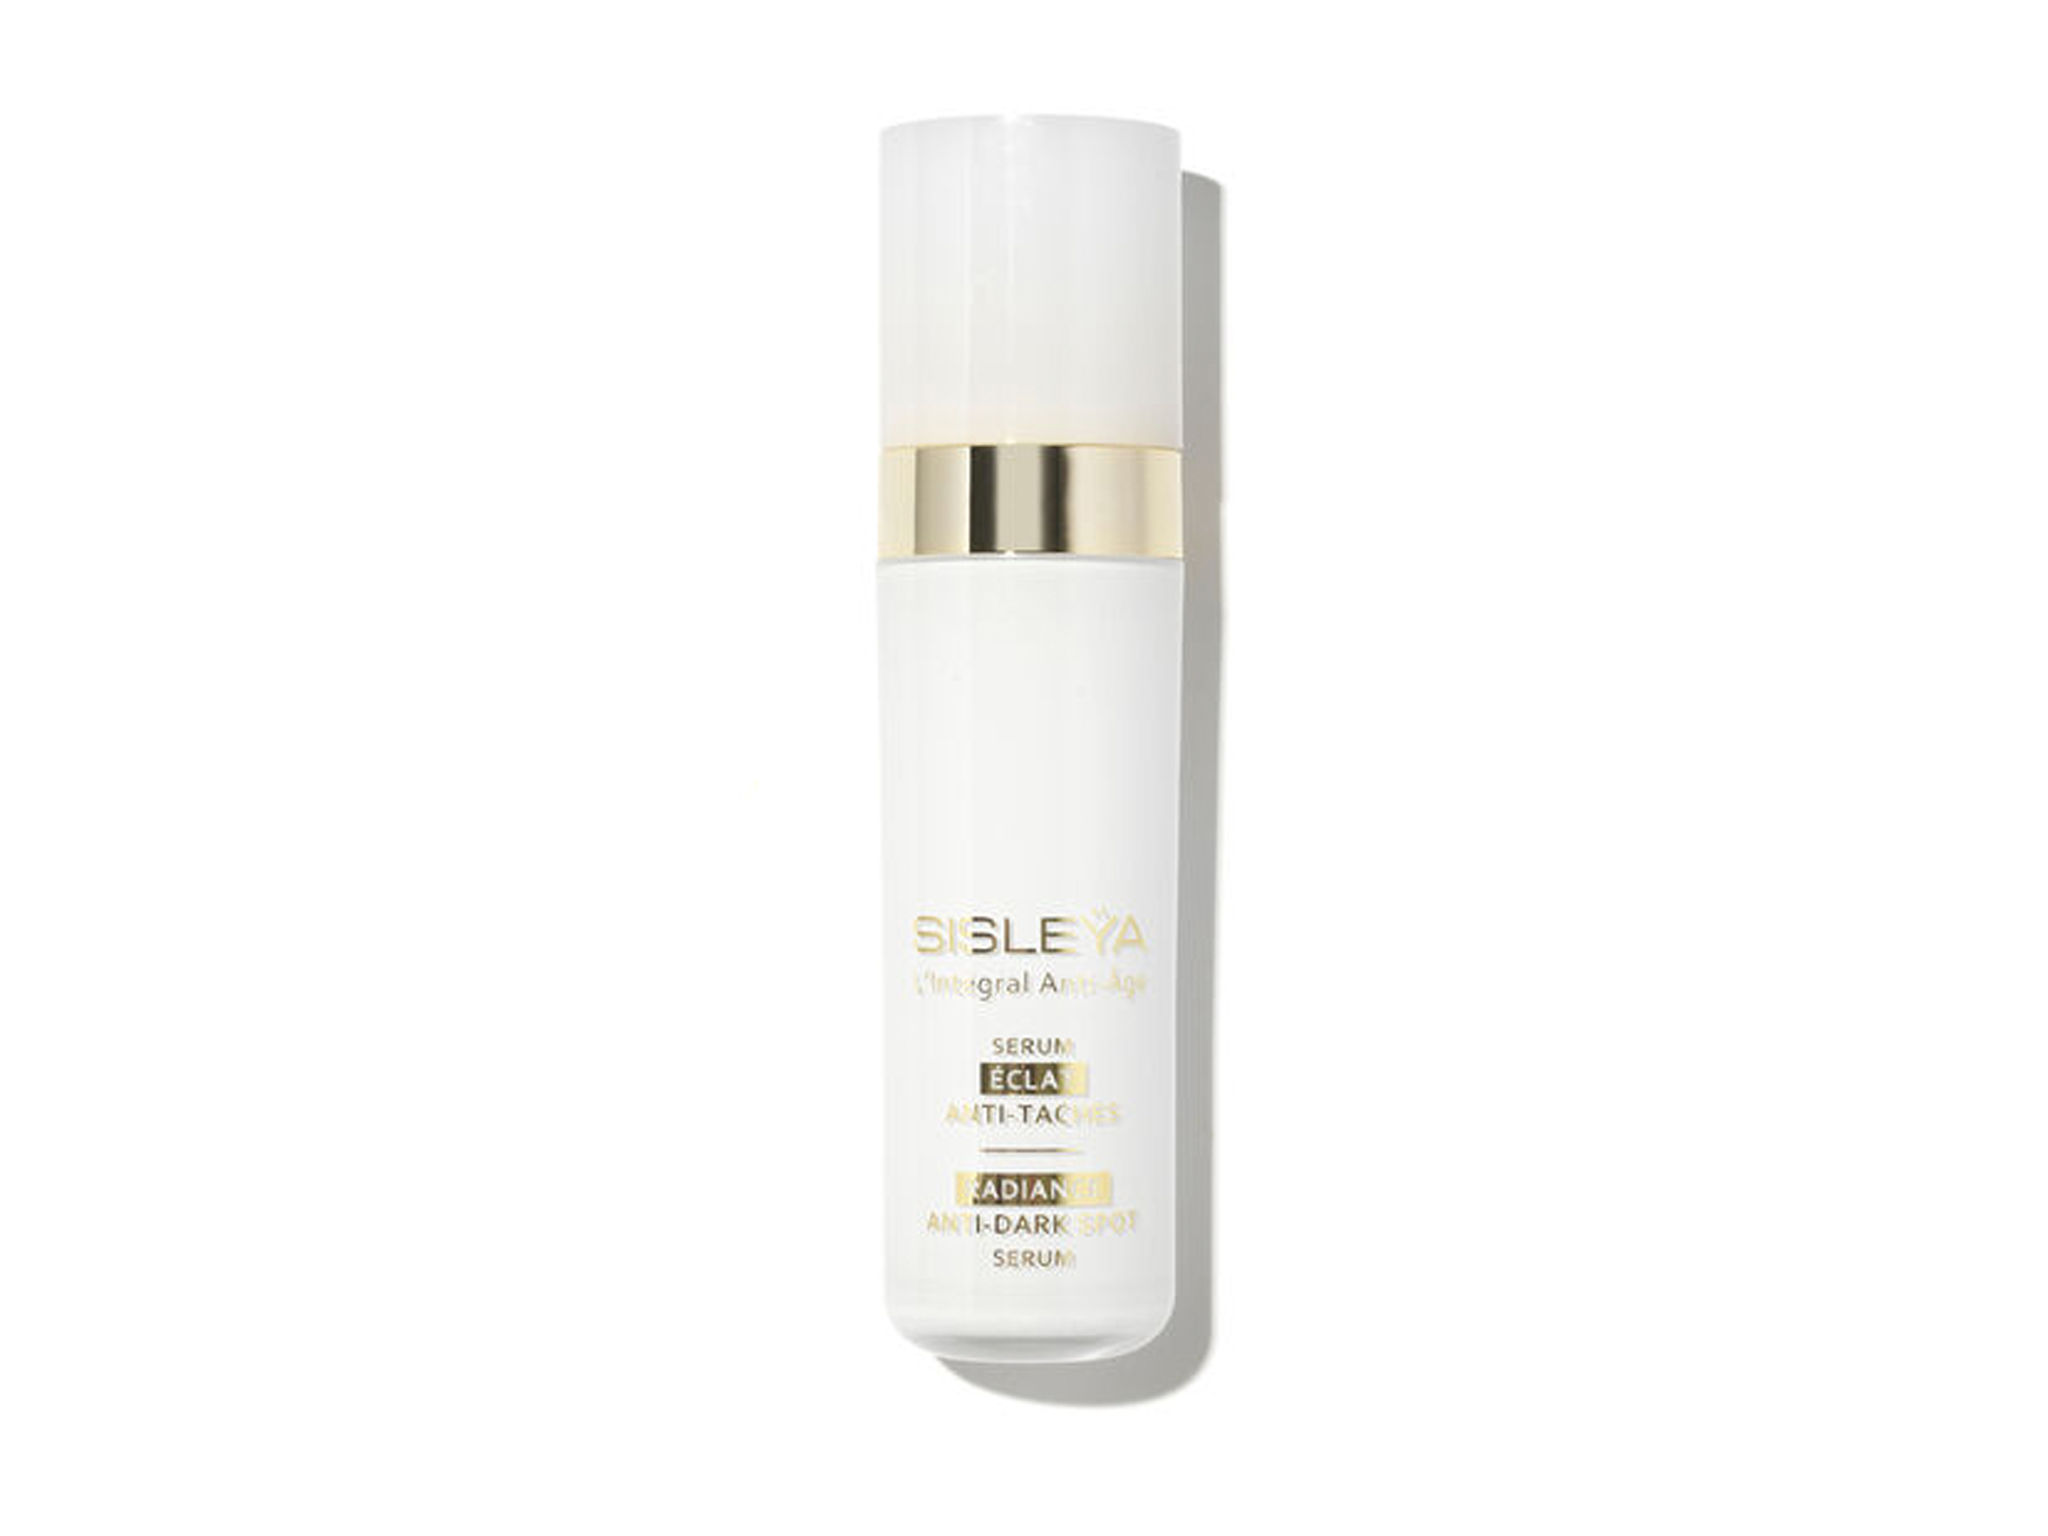 Sisleya-best-skincare-products-for-hyperpigmentation-indybest